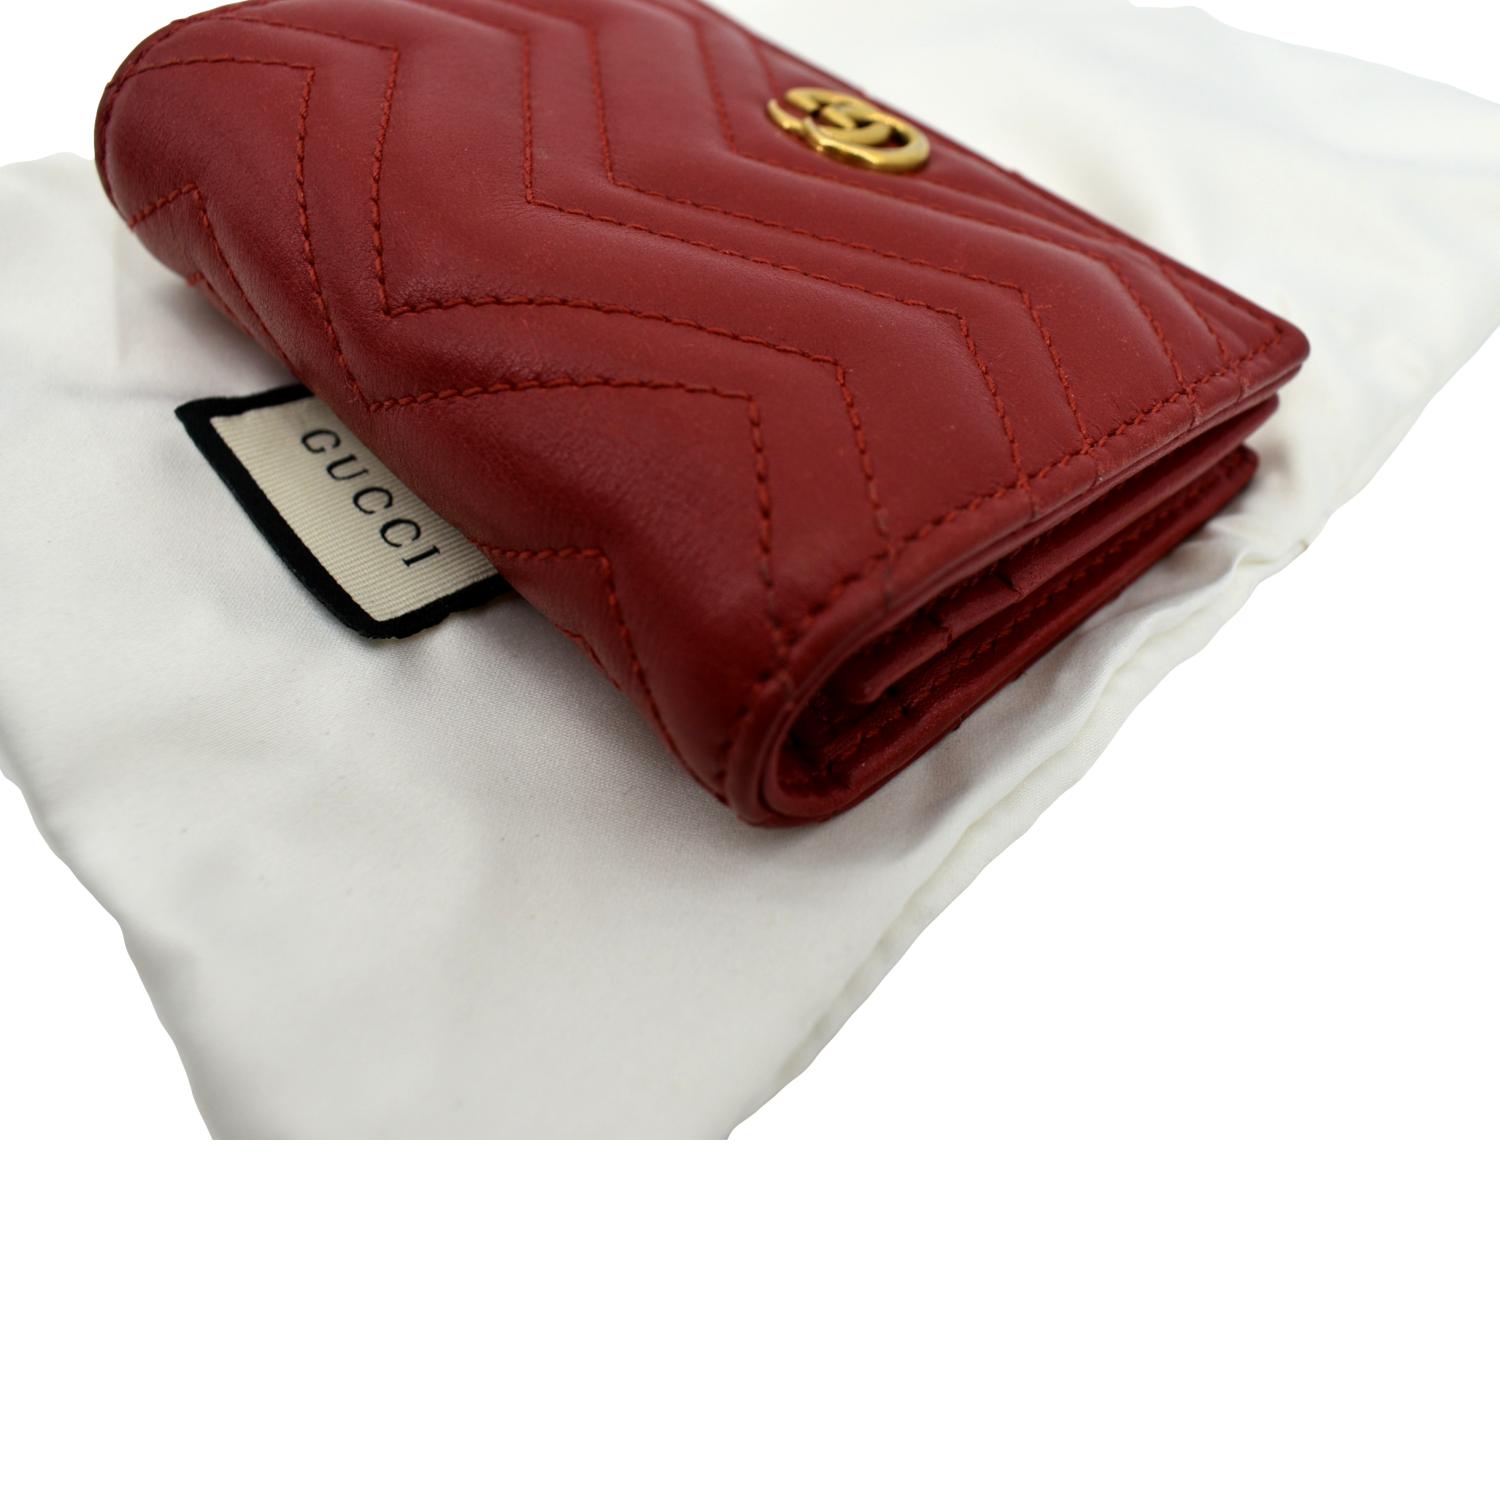 GG Marmont matelassé card case in red